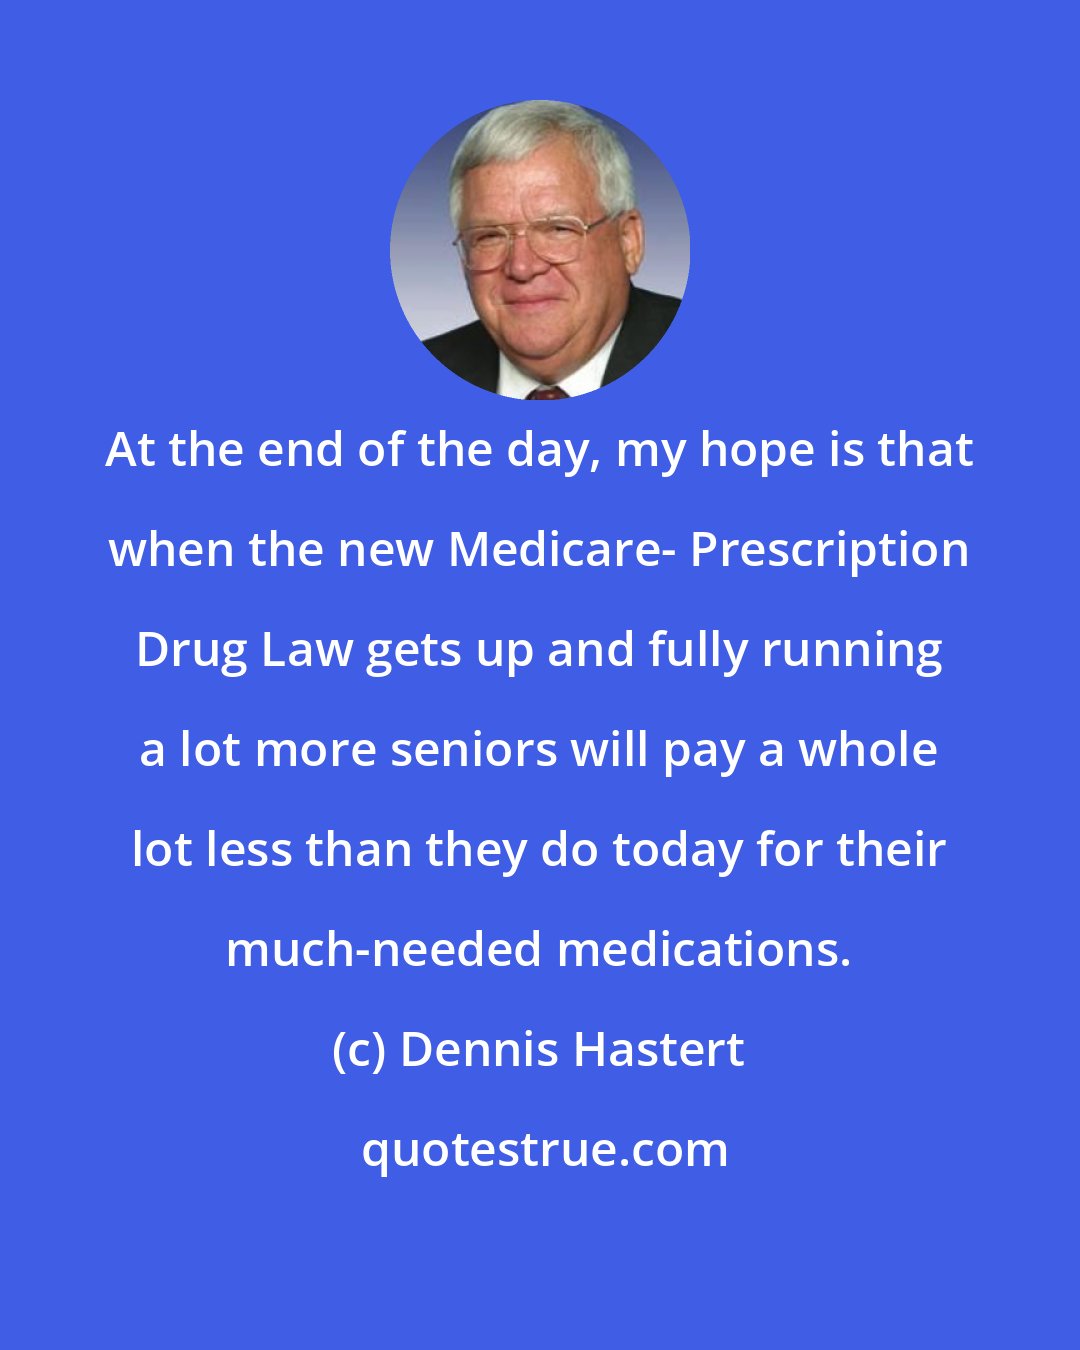 Dennis Hastert: At the end of the day, my hope is that when the new Medicare- Prescription Drug Law gets up and fully running a lot more seniors will pay a whole lot less than they do today for their much-needed medications.